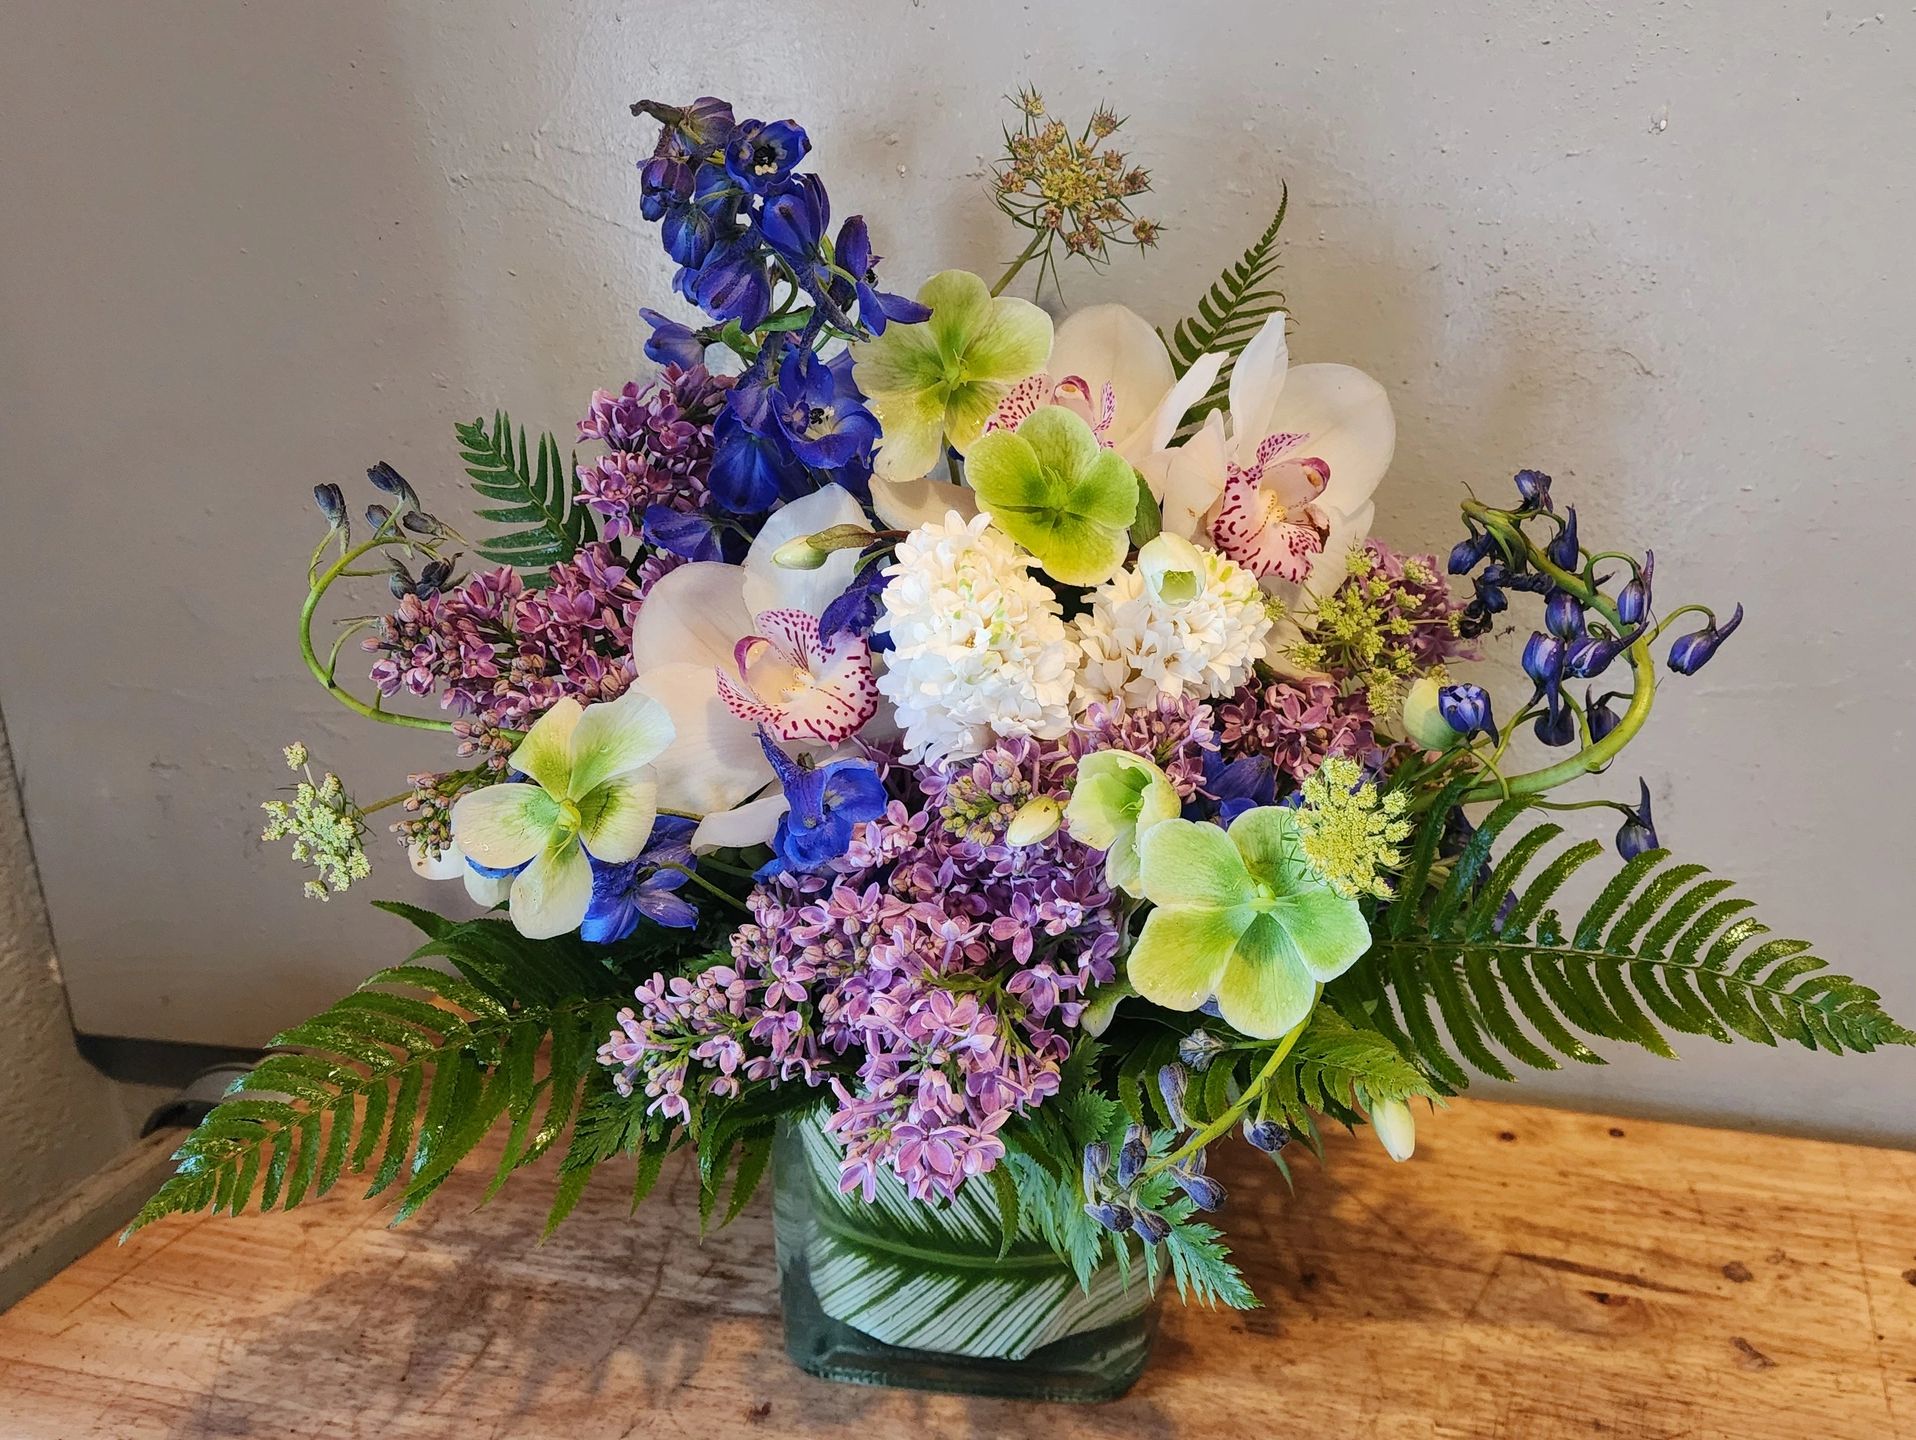 Apollo's Celestial Symphony, made with white cymbidiums, lilac, hellebores, blue delphiniums.